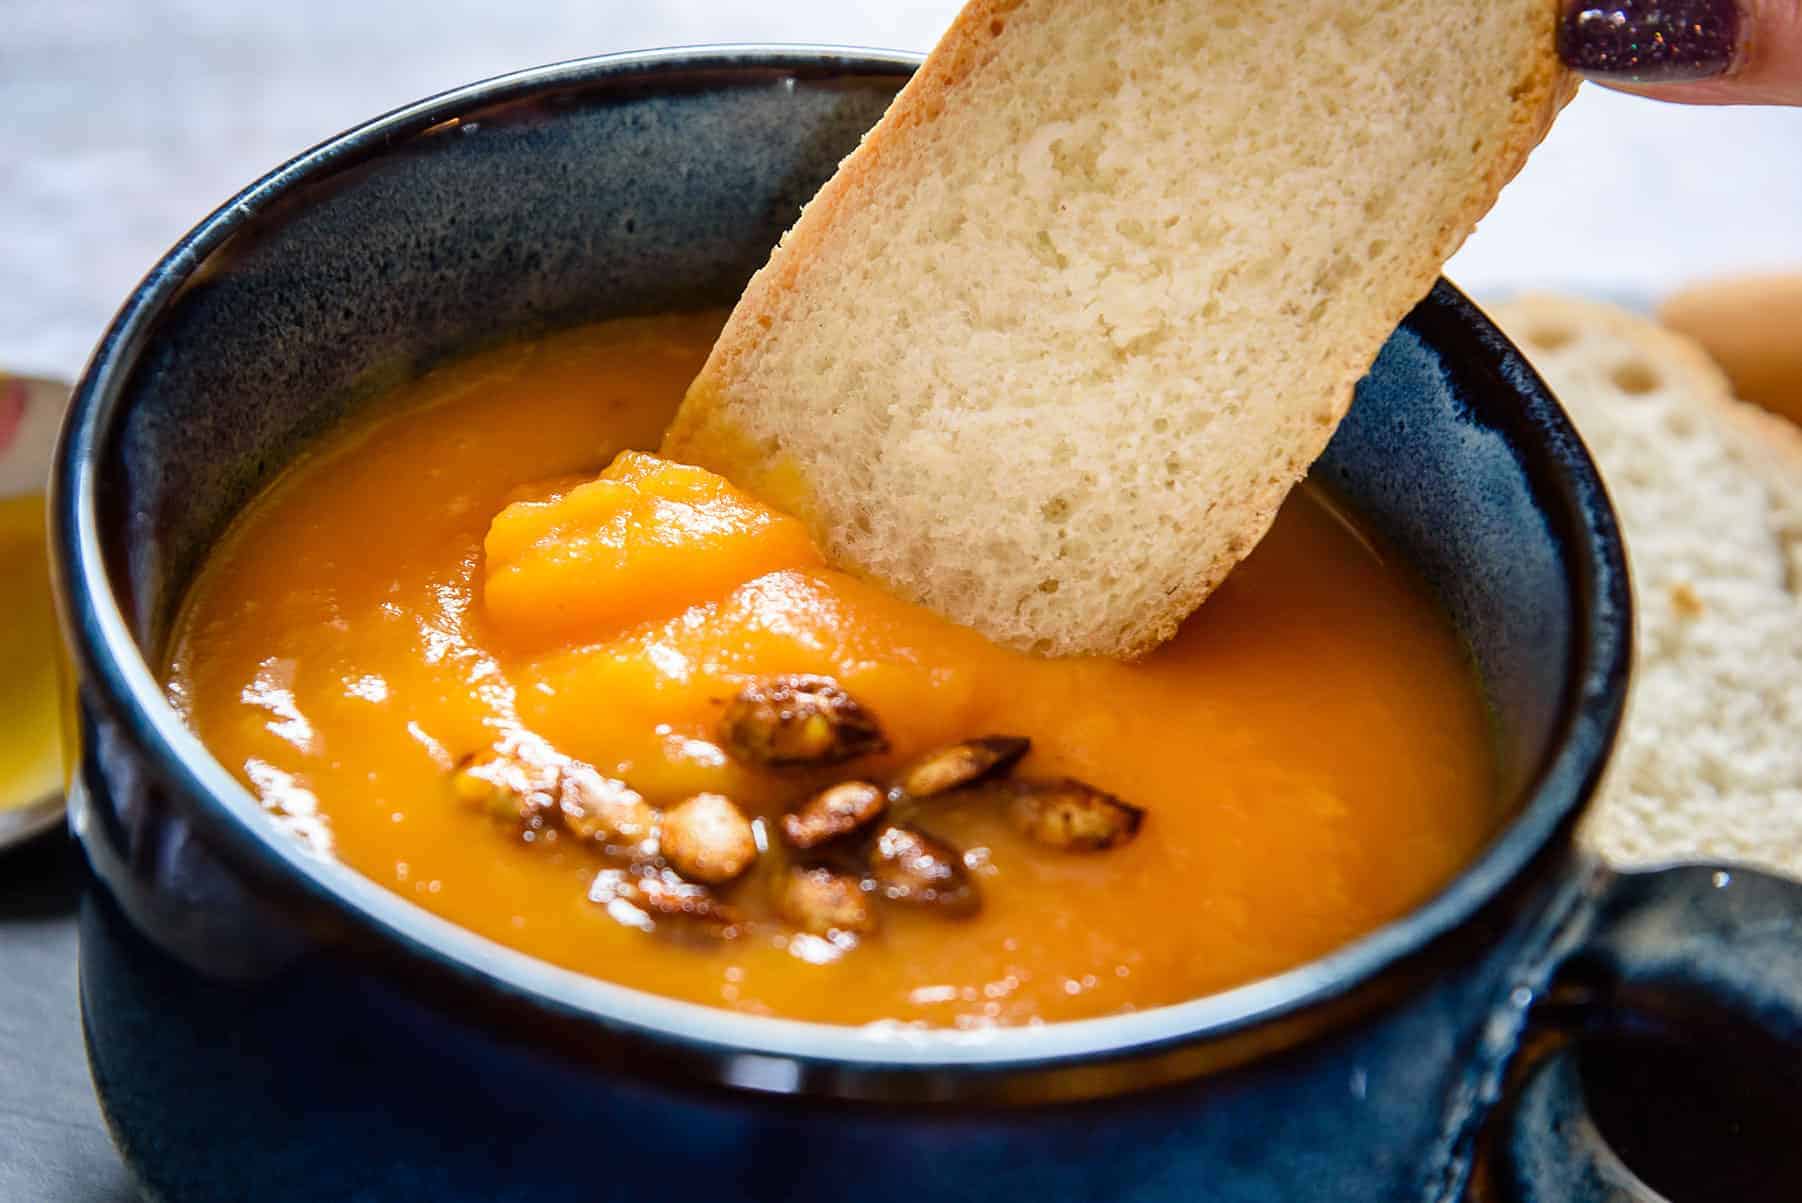 Dipping bread into Vegan Butter-Roasted Butternut-Squash Soup